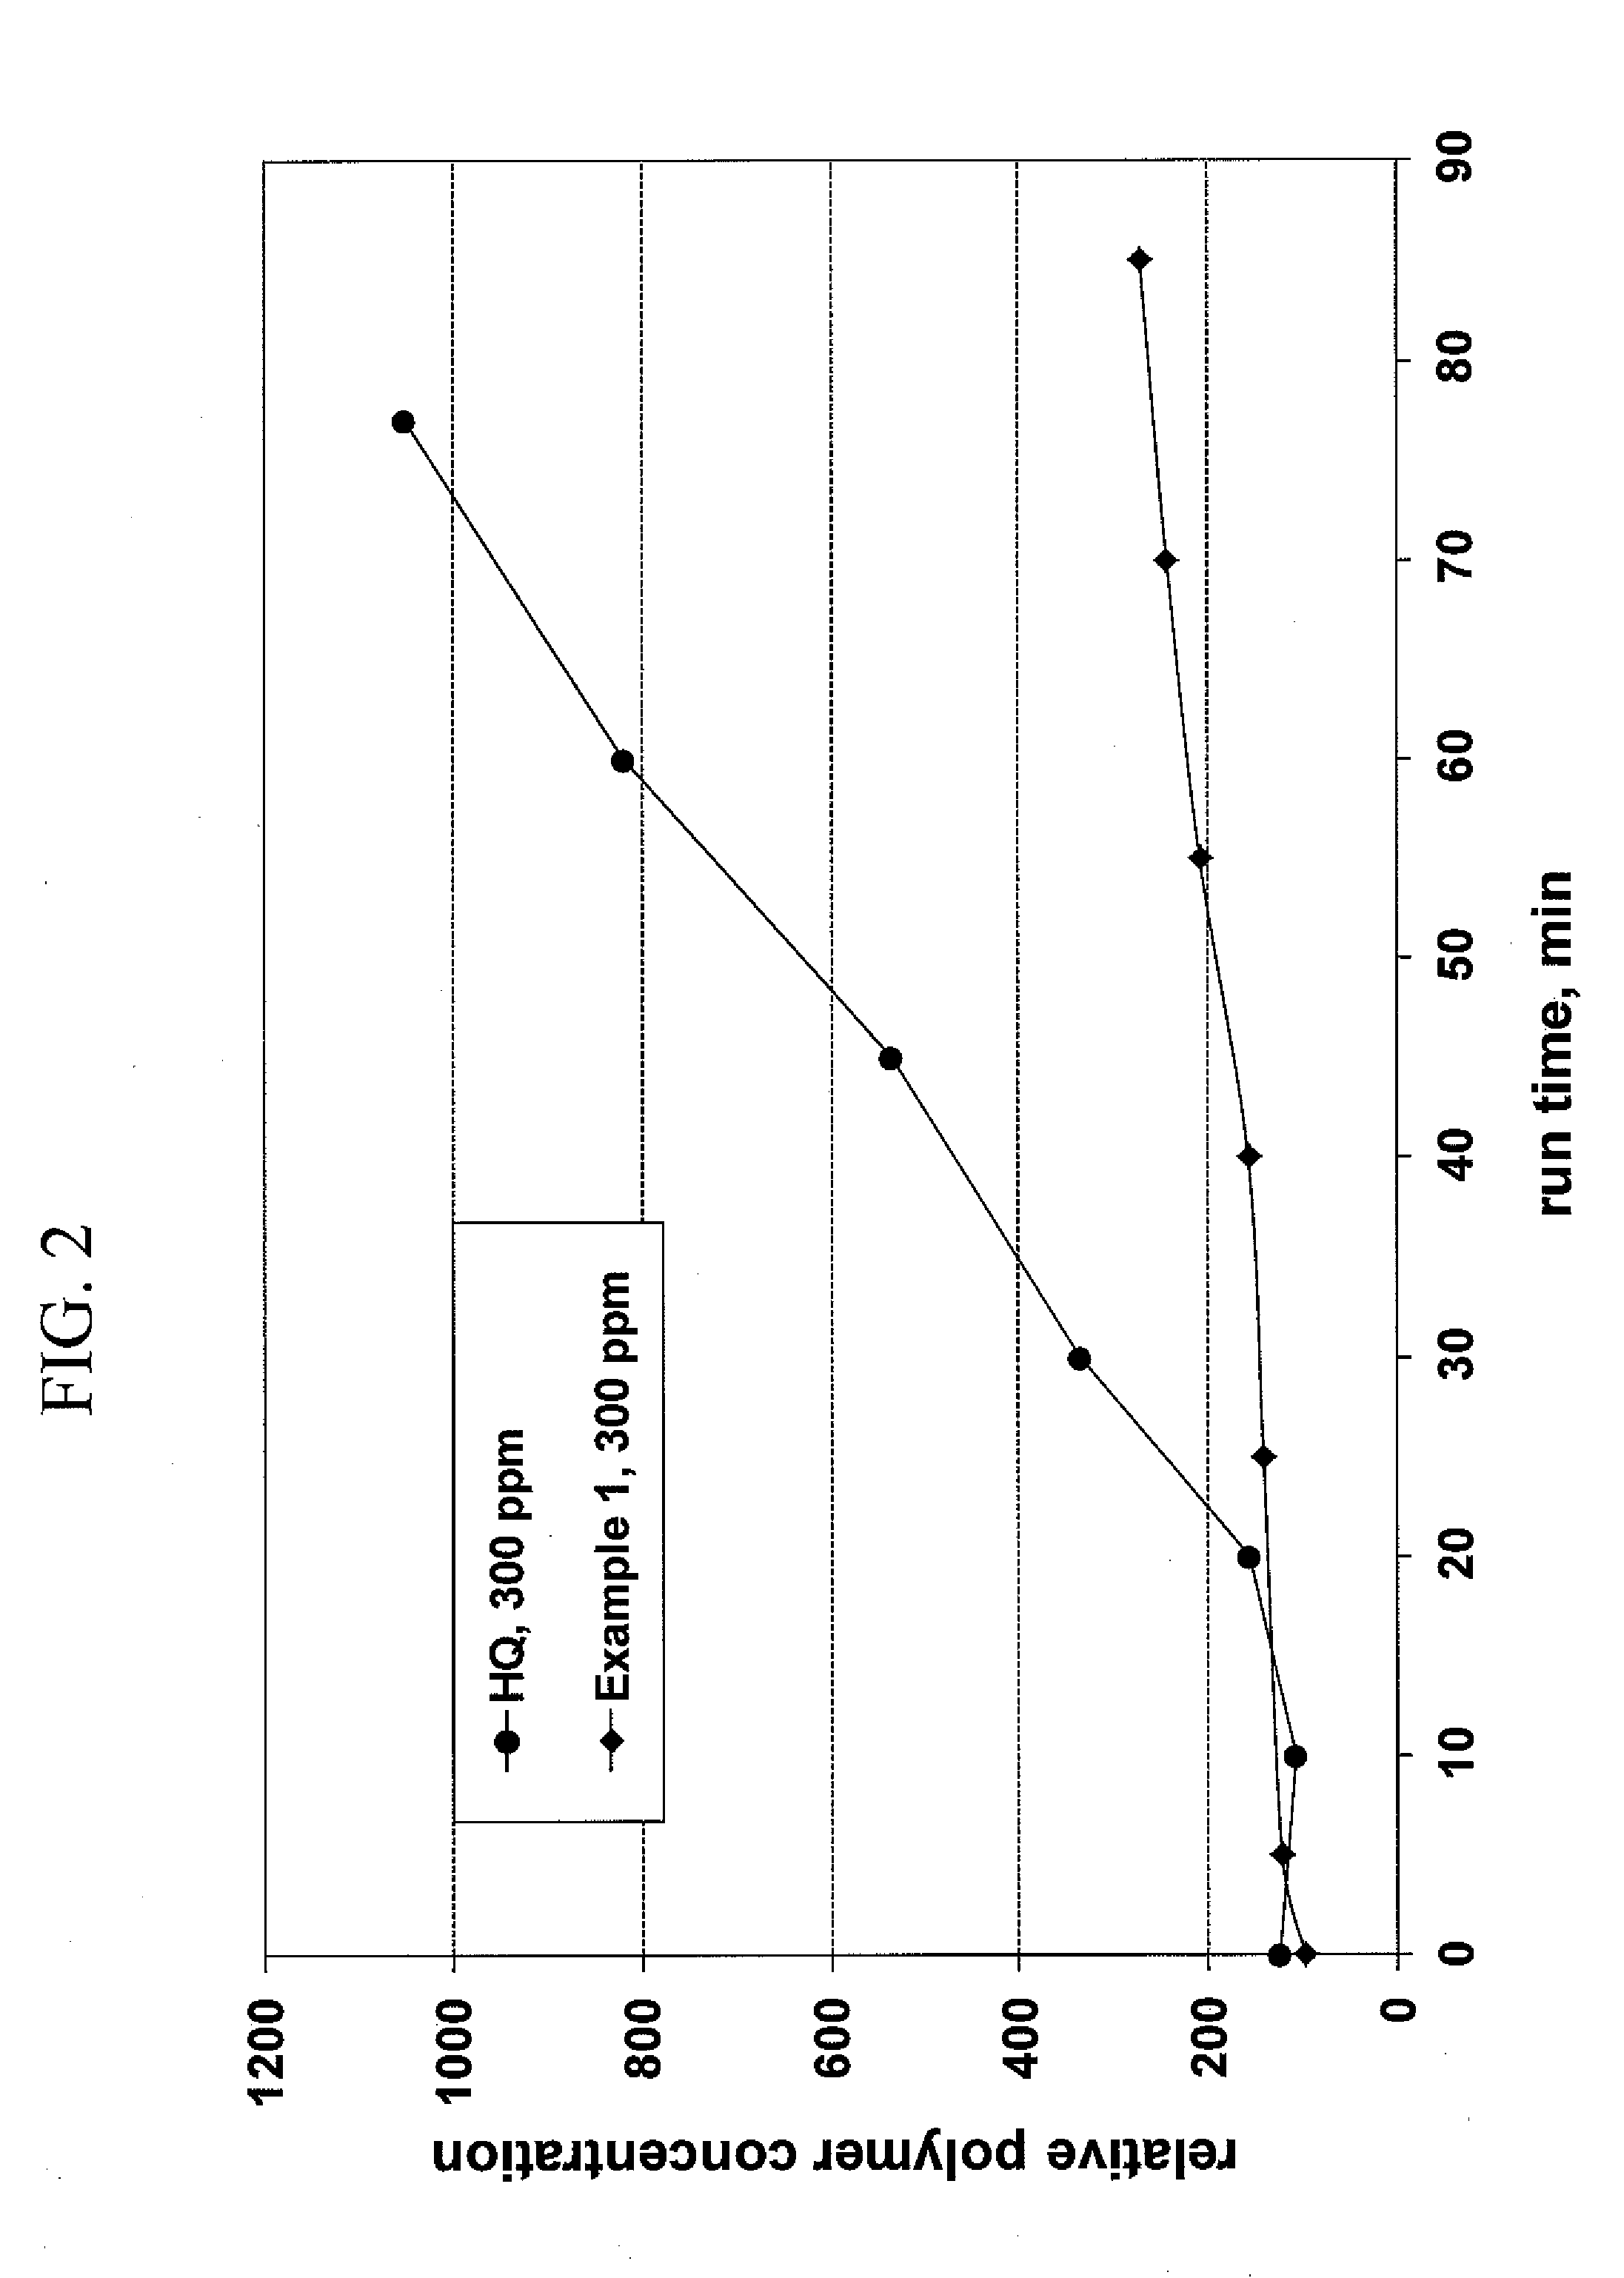 Multi-component polymerization inhibitors for ethylenically unsaturated monomers